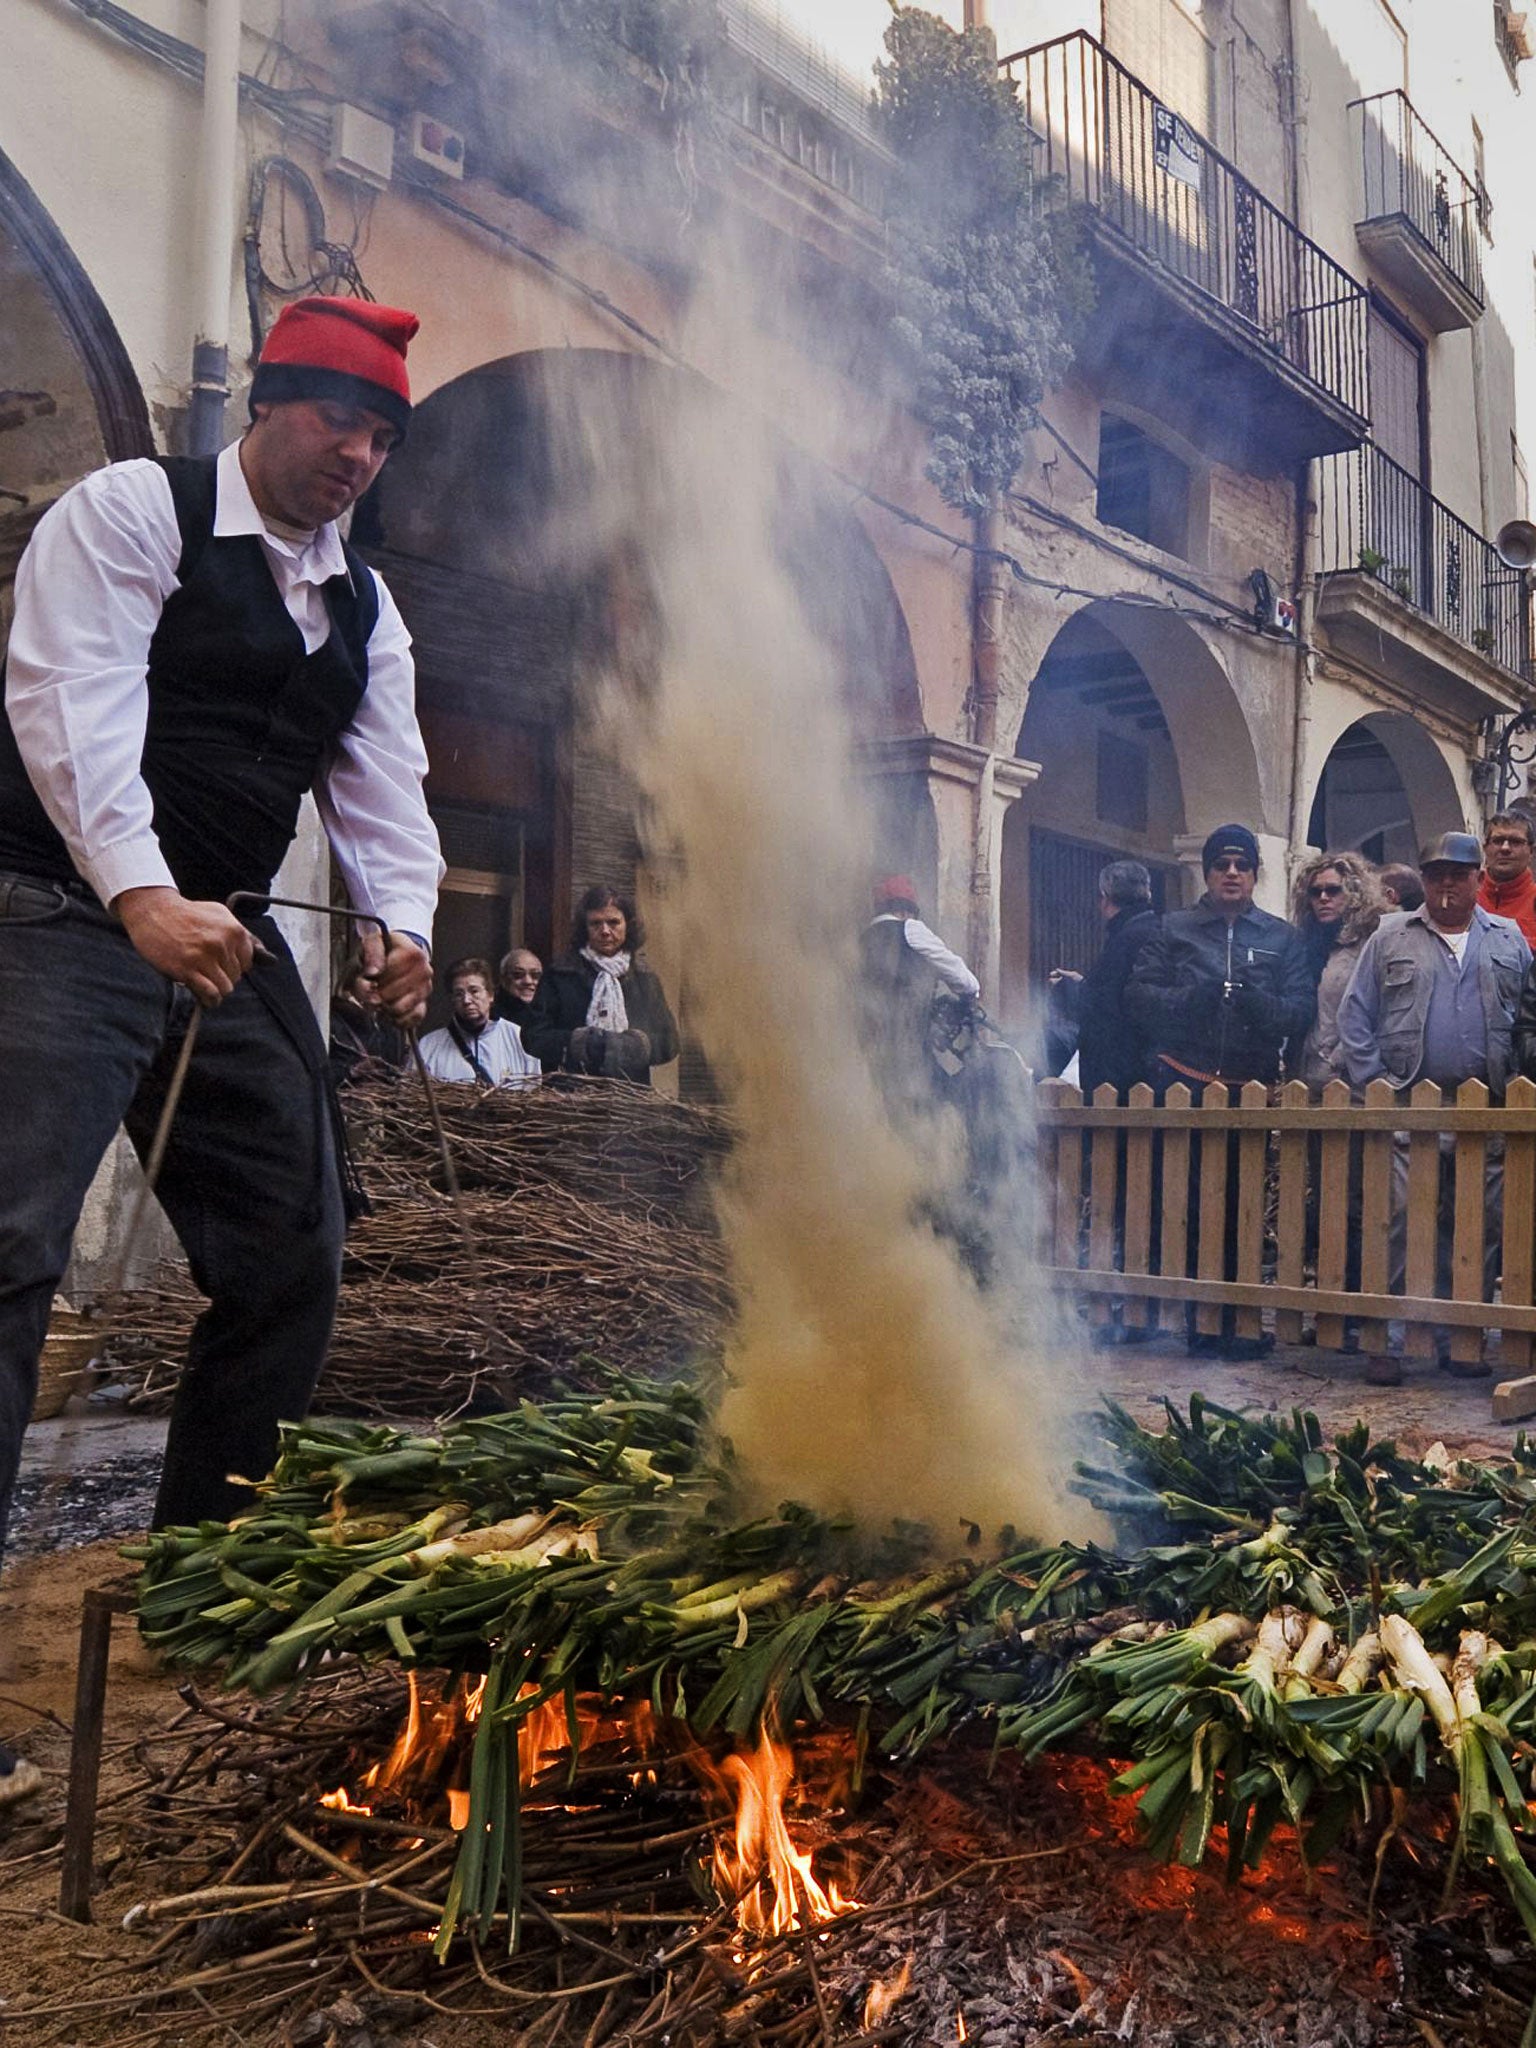 Flame grilled: a calçotada in Valls